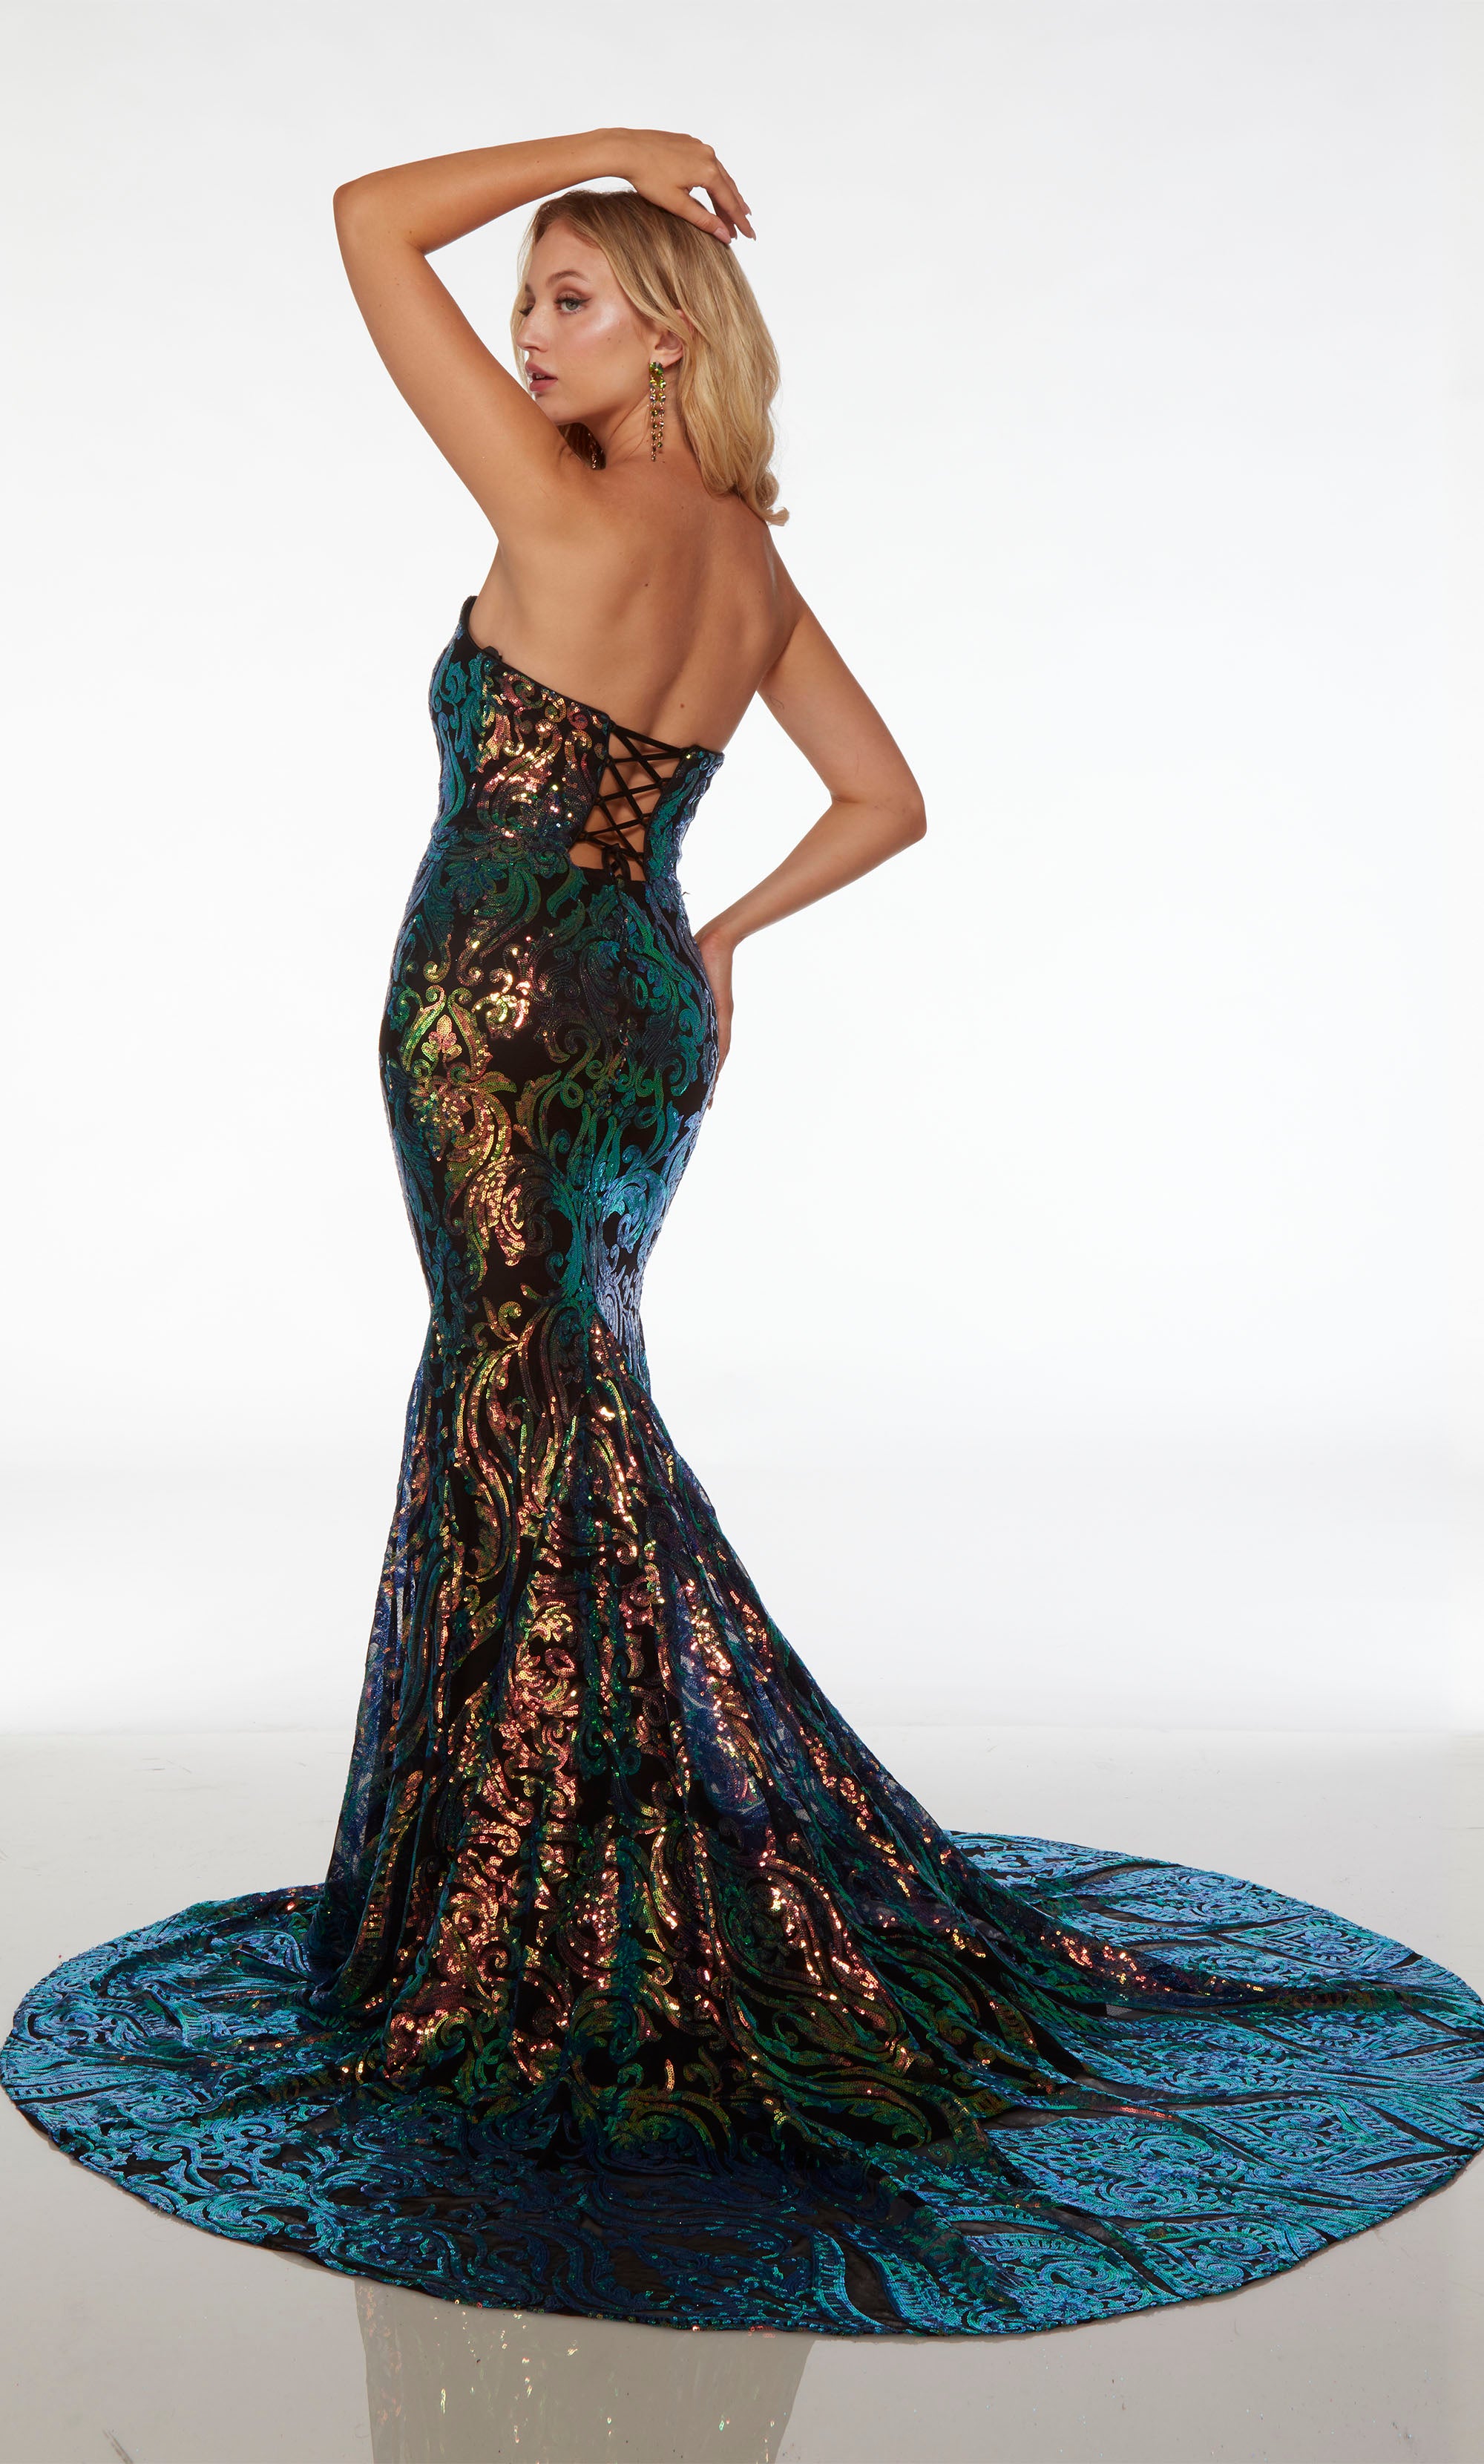 Elegant black mermaid gown: Strapless neckline, fitted bodice, lace-up back, long train, paisley-patterned iridescent sequins.